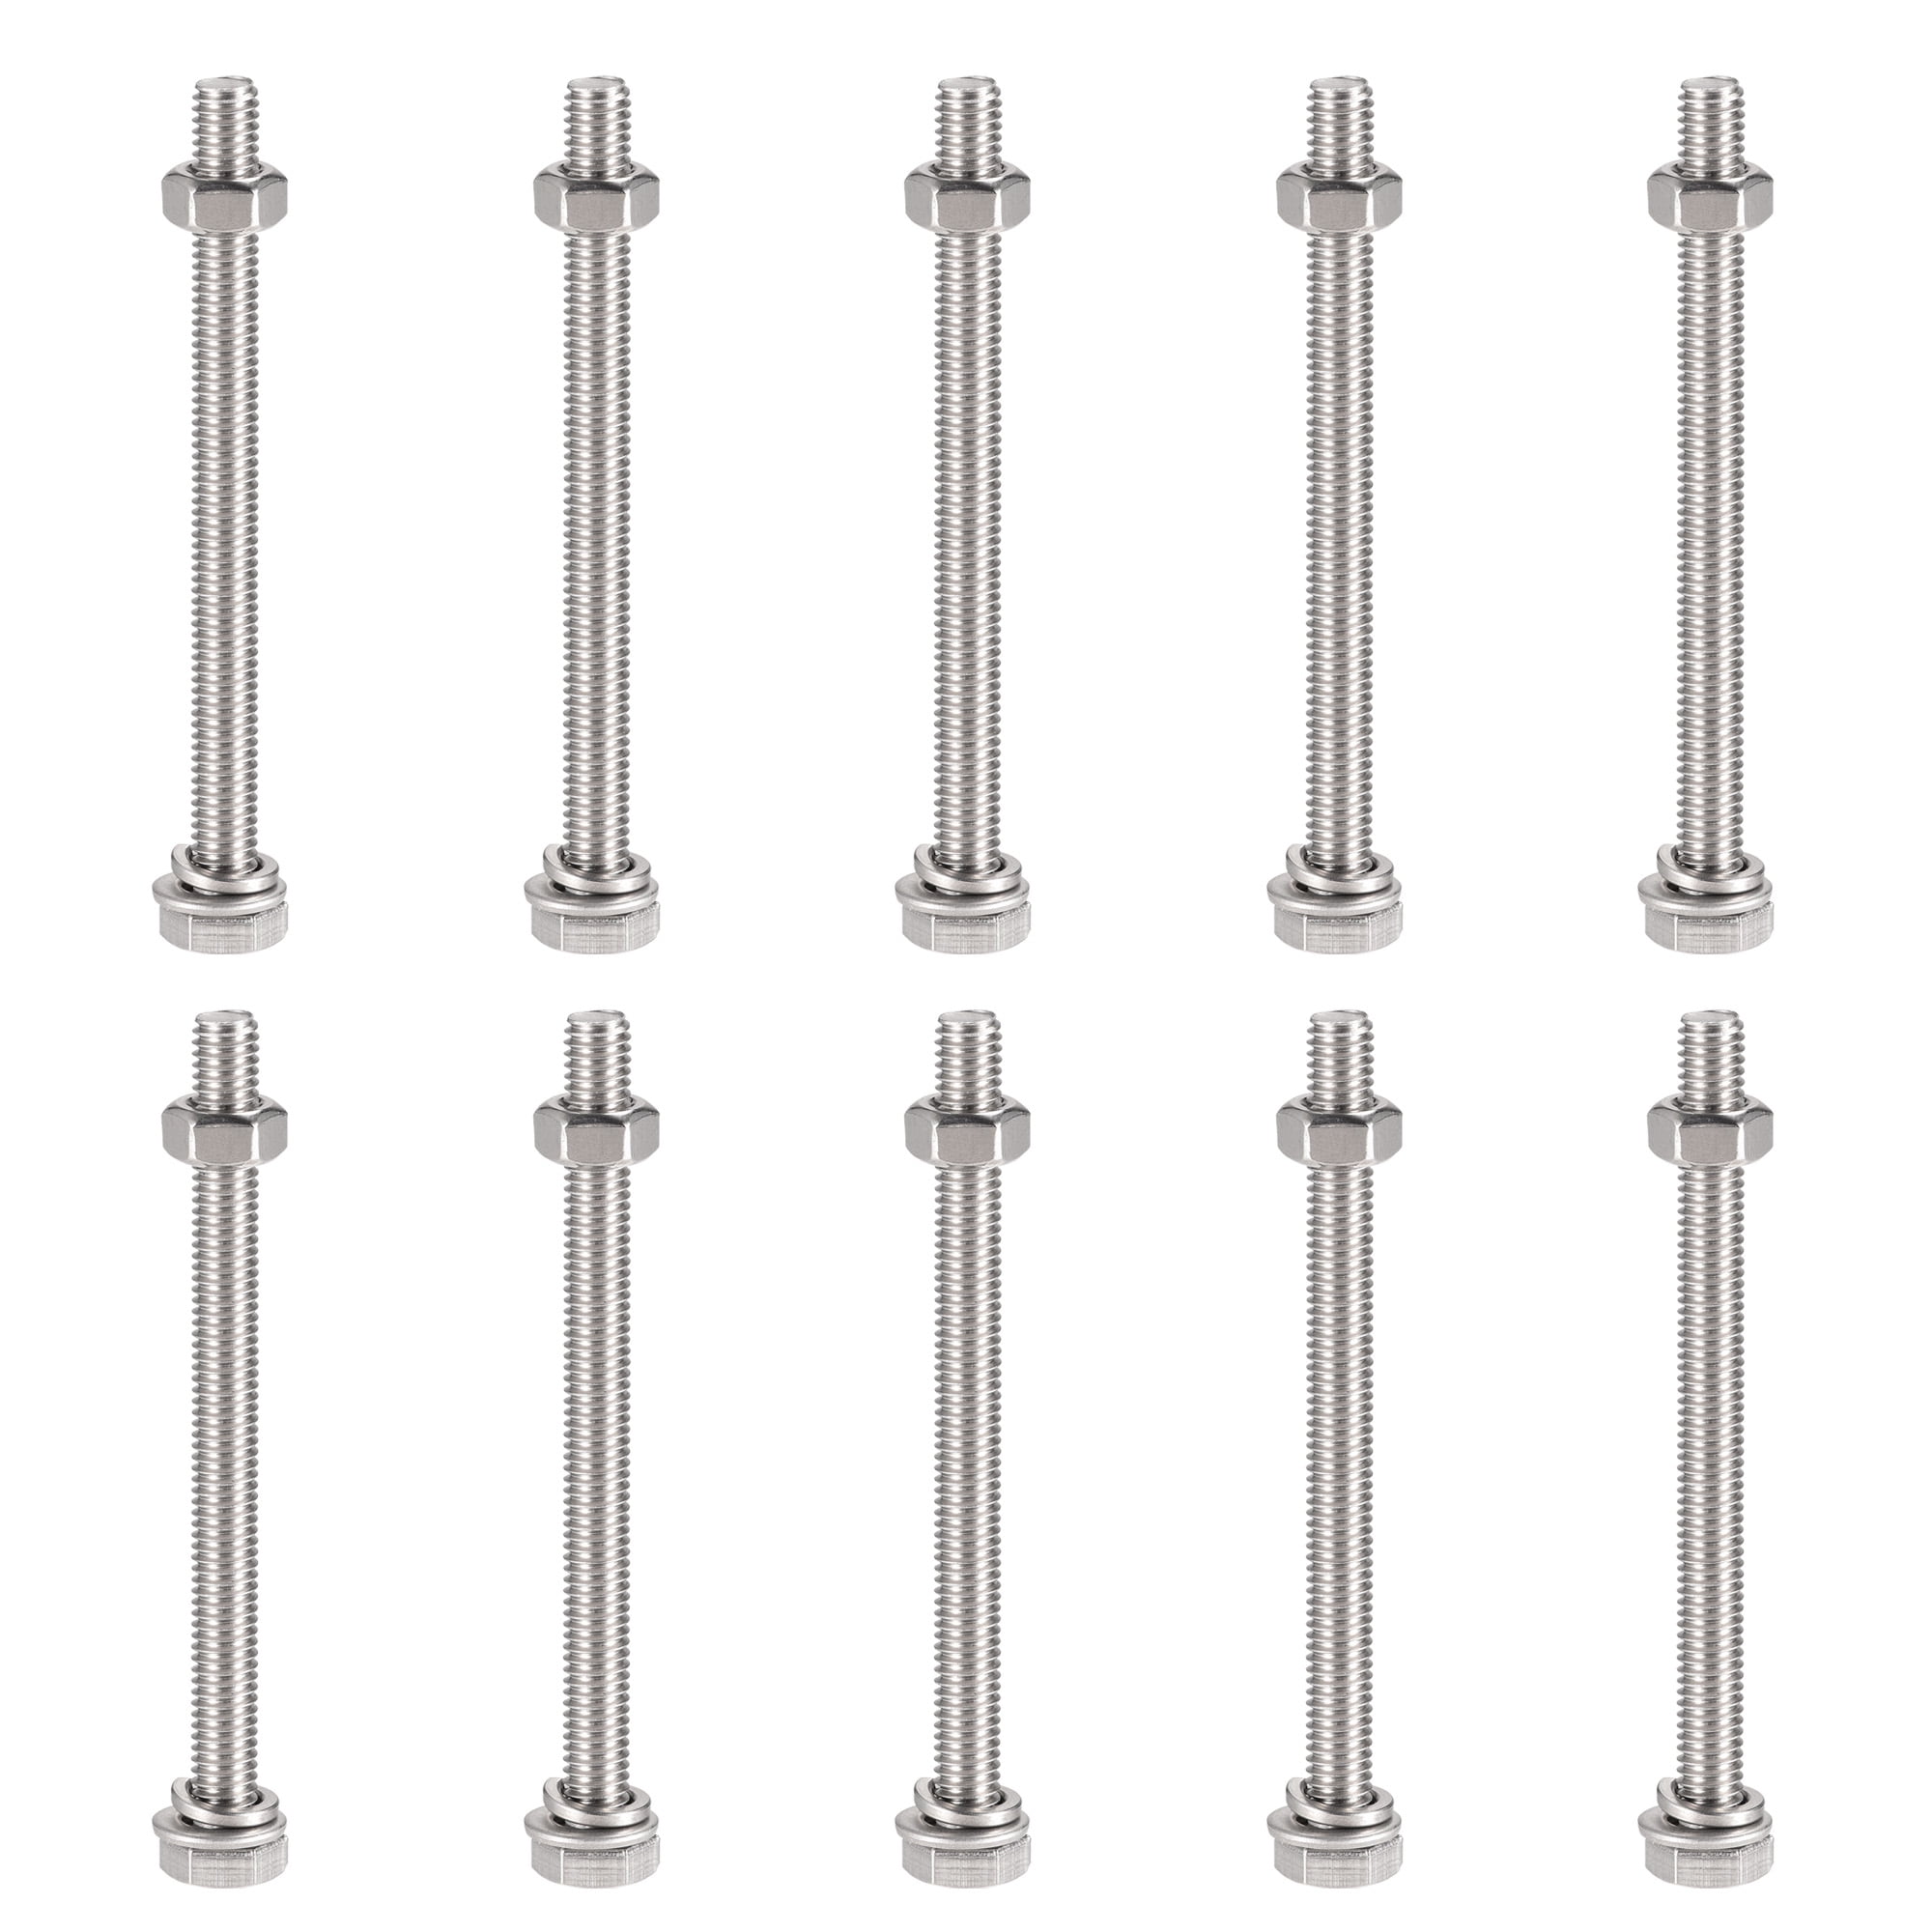 304 Stainless Steel Fully Thread Hexagon Bolts 6 Sets Nuts uxcell M8 x 16mm Hex Head Screws Bolts Flat & Lock Washers Kits 